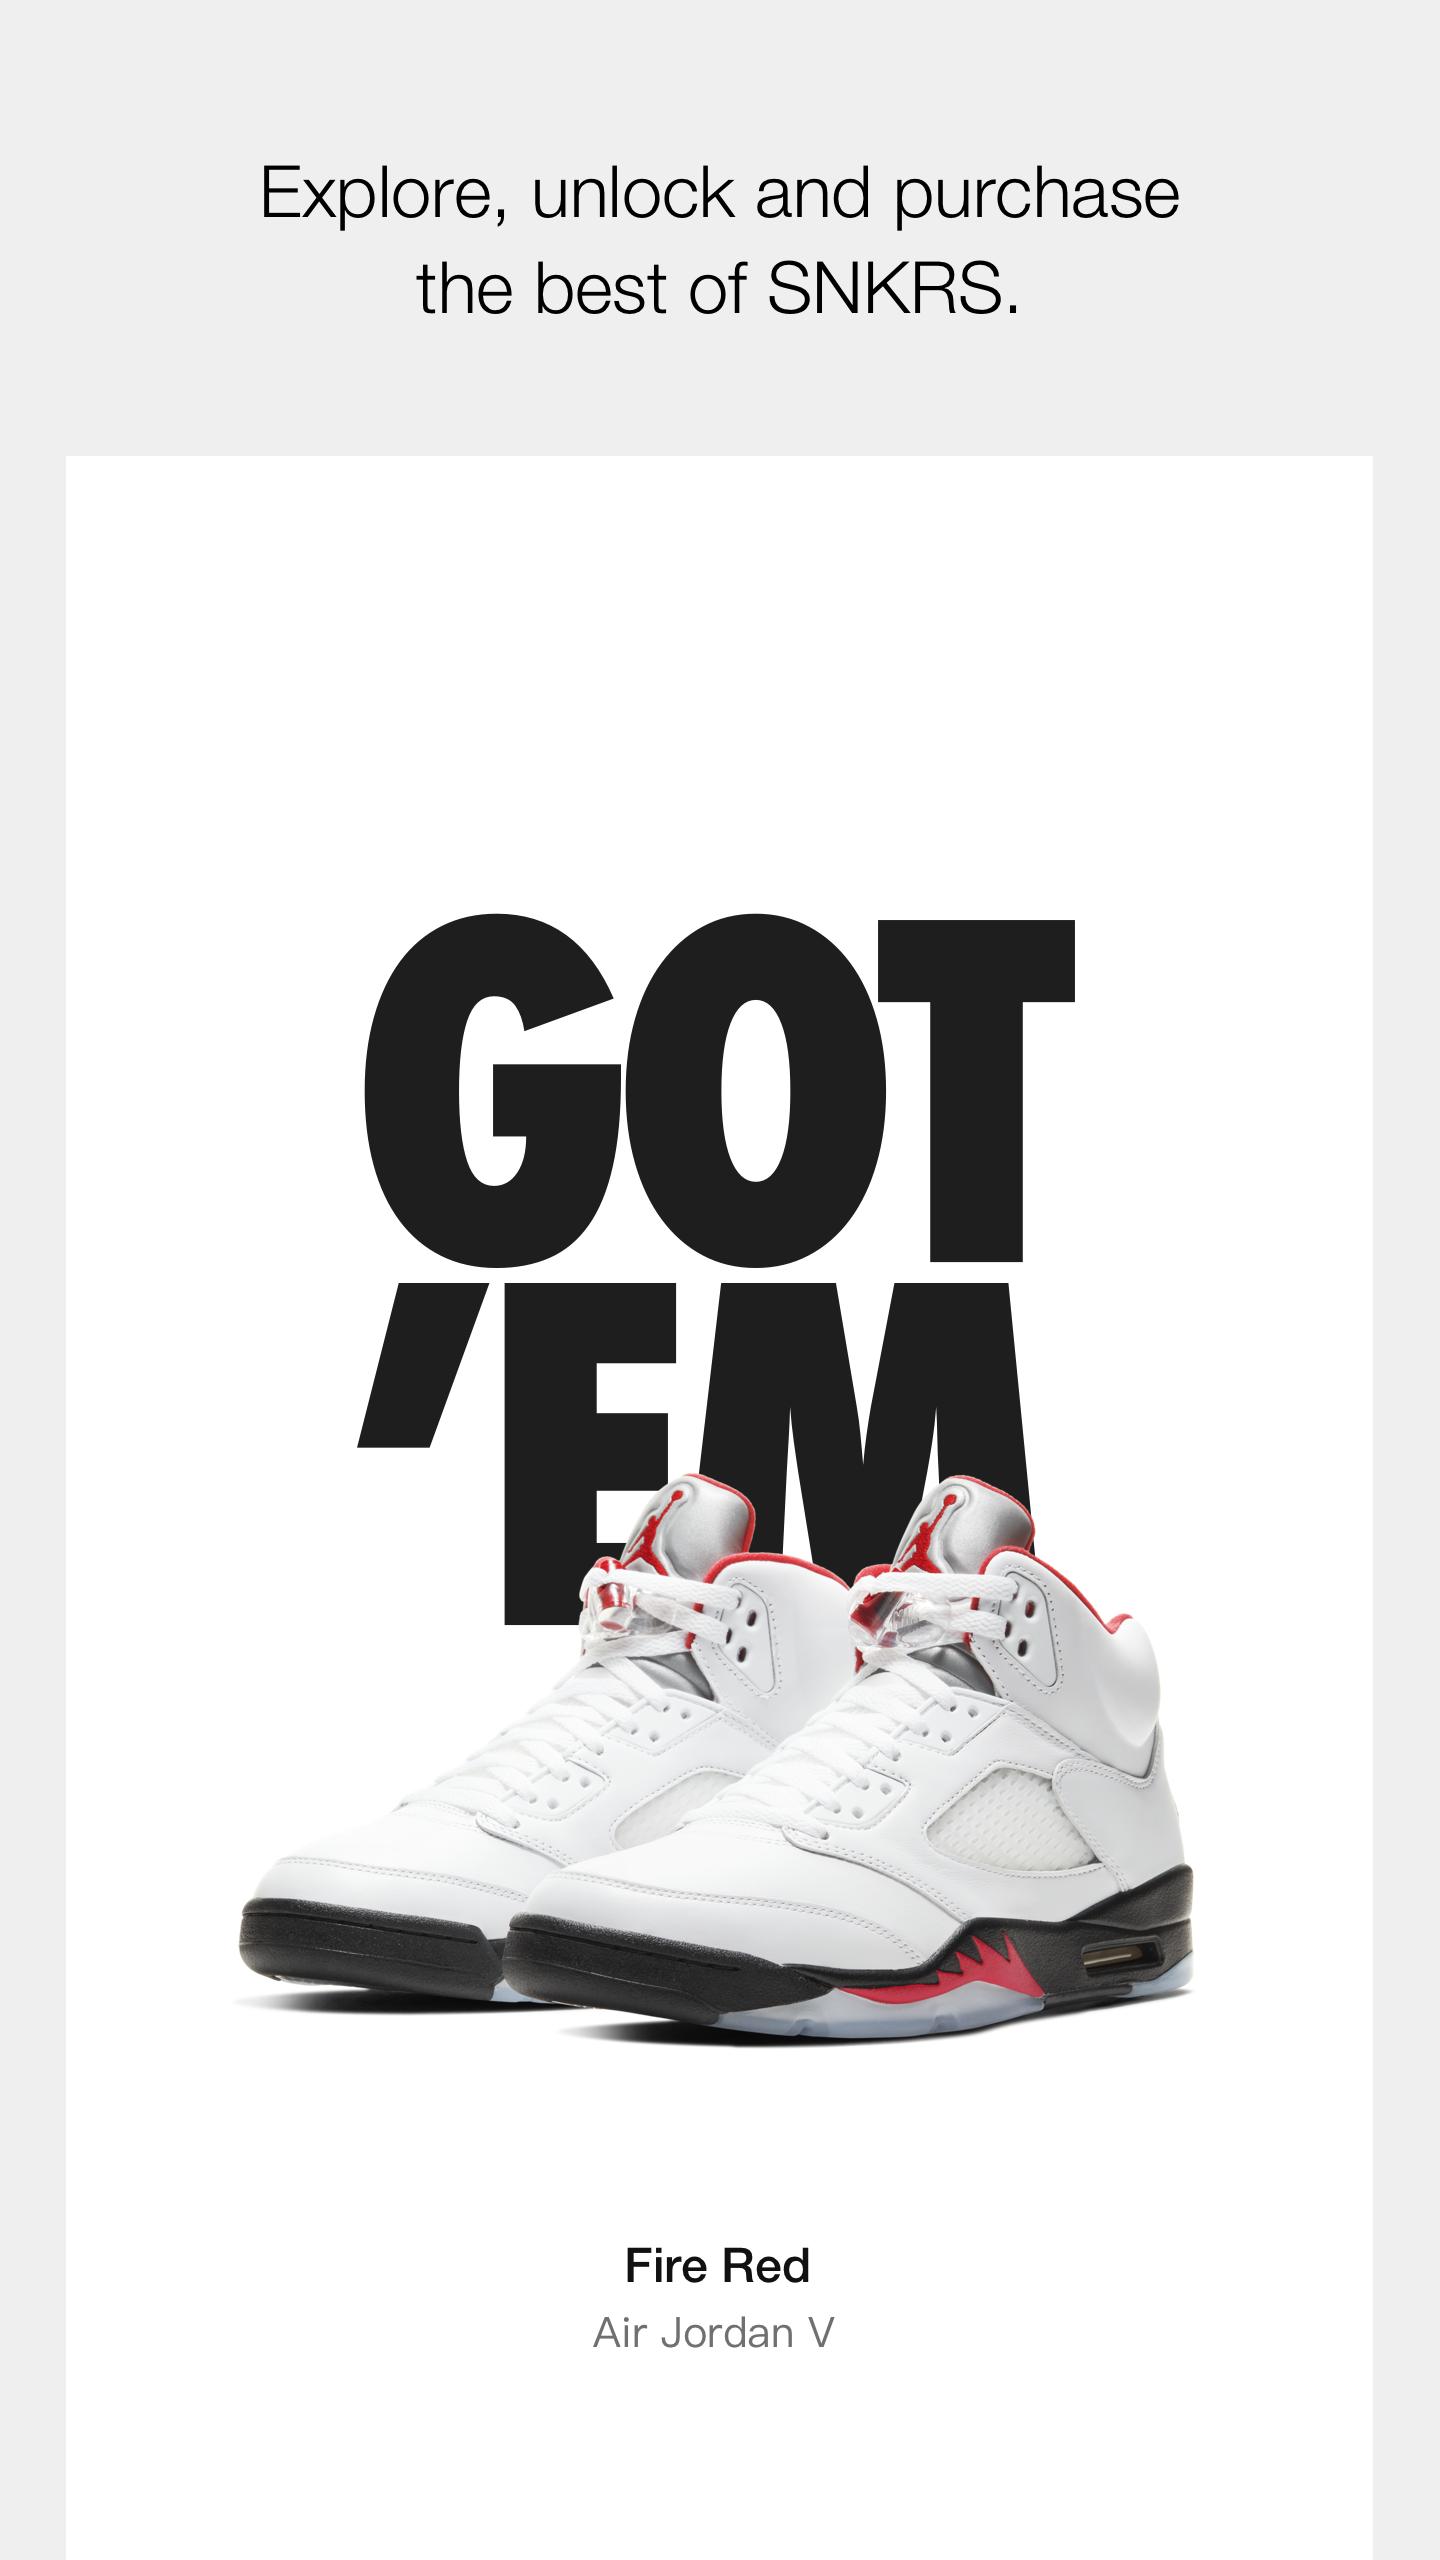 Nike SNKRS: Find & Buy The Latest Sneaker Releases 3.1.1 Screenshot 1